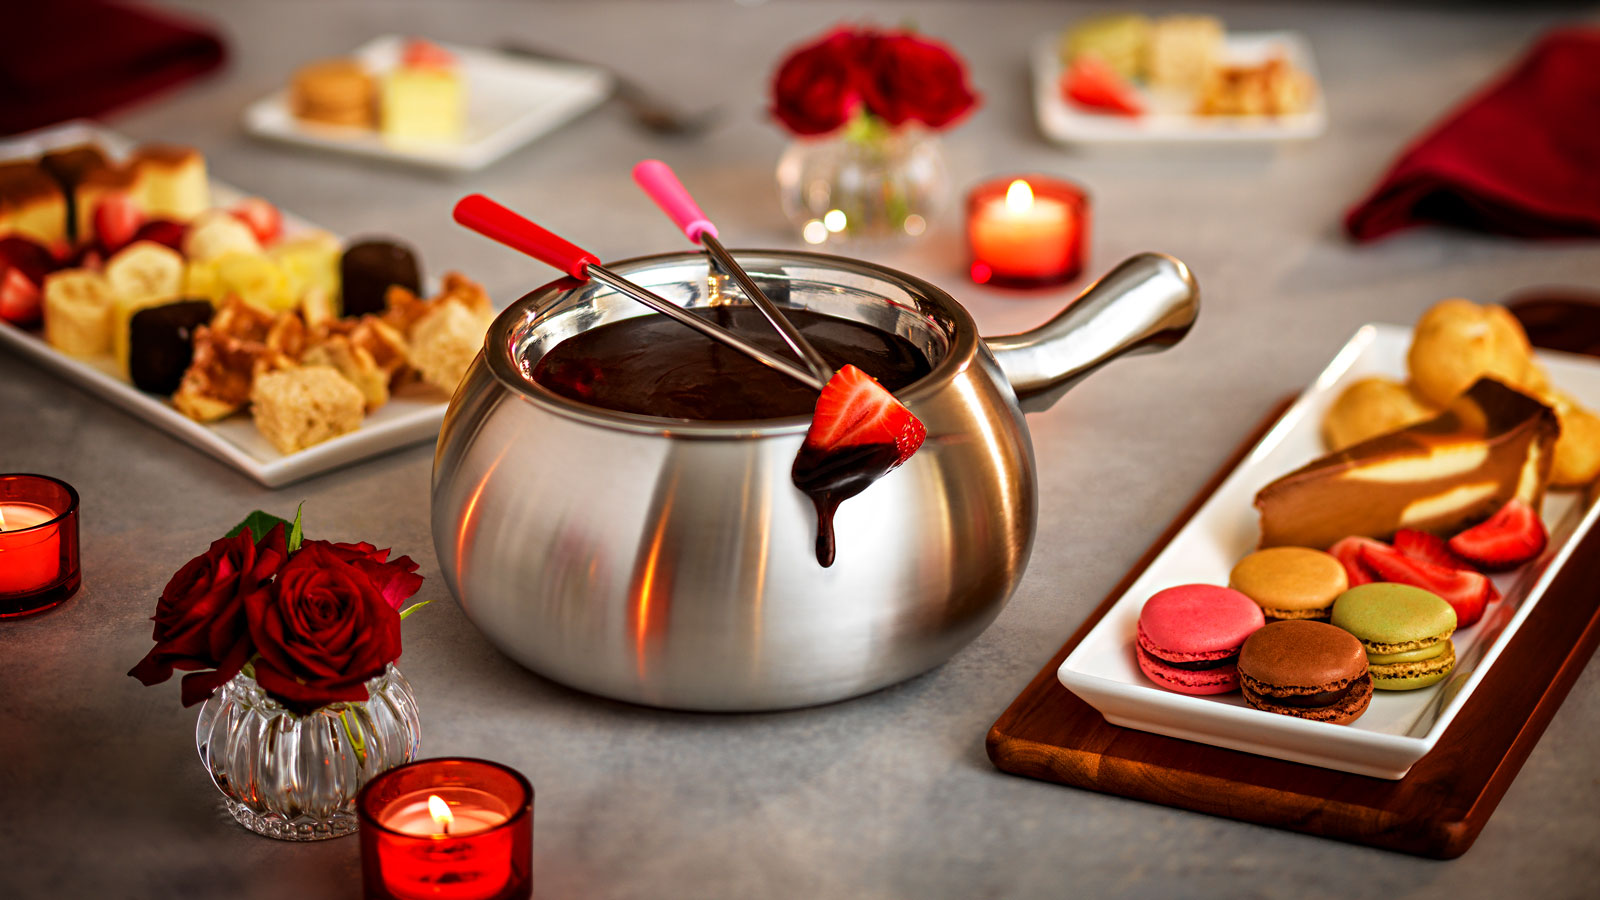 Valentines Weekend at the Melting Pot